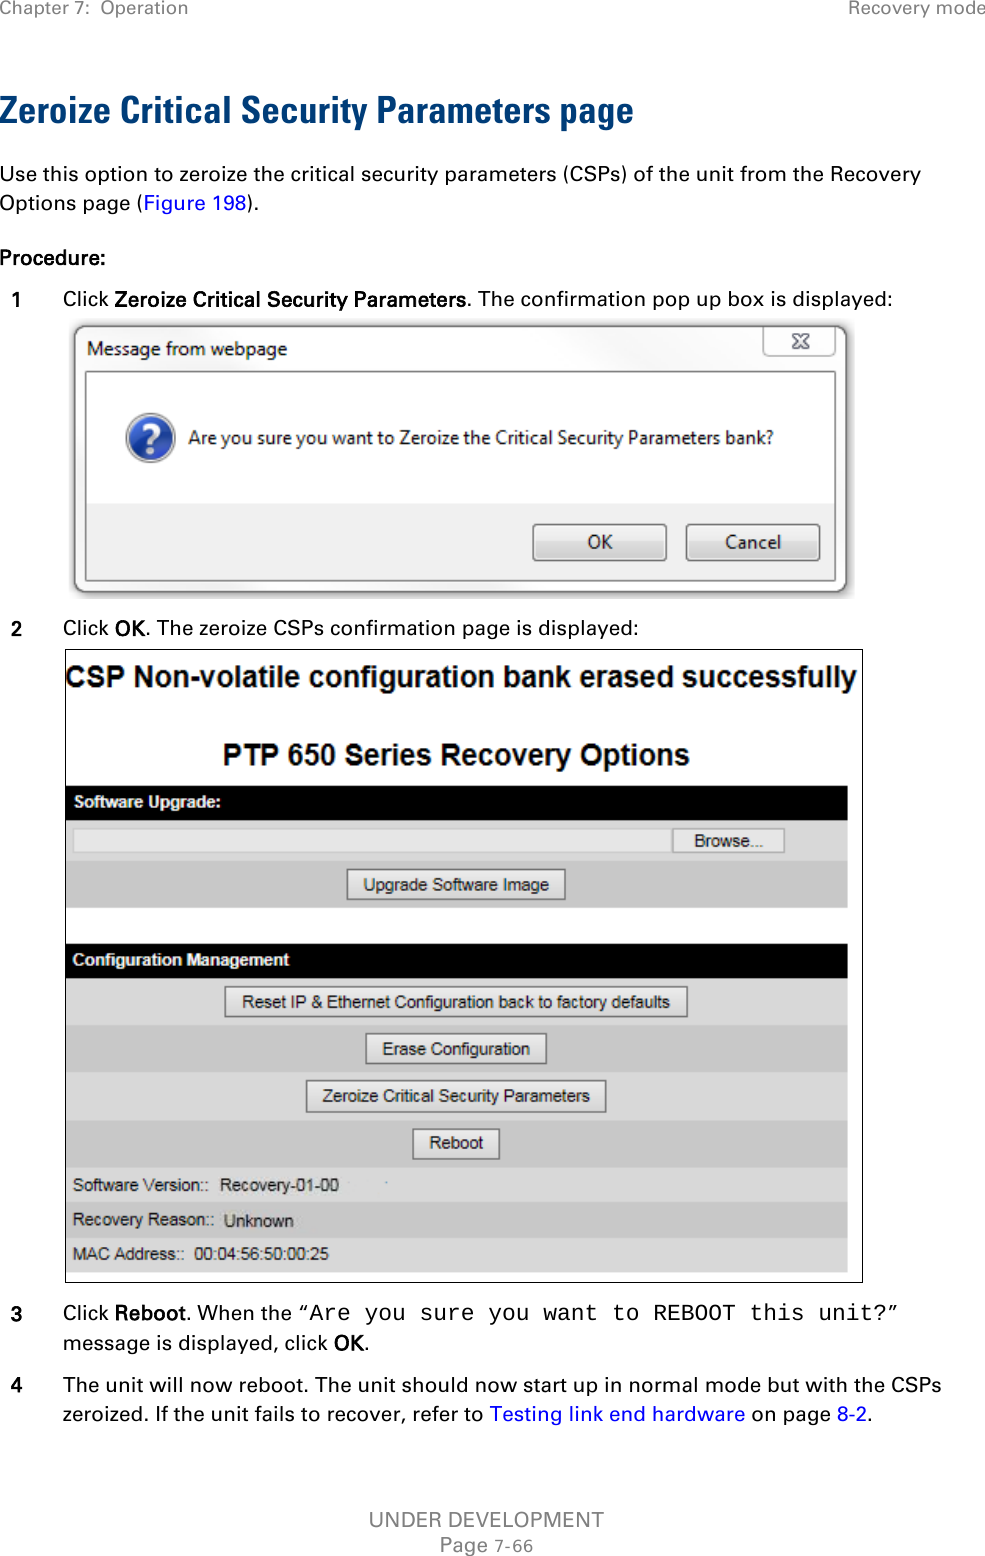 Chapter 7:  Operation Recovery mode  Zeroize Critical Security Parameters page Use this option to zeroize the critical security parameters (CSPs) of the unit from the Recovery Options page (Figure 198). Procedure: 1 Click Zeroize Critical Security Parameters. The confirmation pop up box is displayed:    2 Click OK. The zeroize CSPs confirmation page is displayed:  3 Click Reboot. When the “Are you sure you want to REBOOT this unit?” message is displayed, click OK. 4 The unit will now reboot. The unit should now start up in normal mode but with the CSPs zeroized. If the unit fails to recover, refer to Testing link end hardware on page 8-2. UNDER DEVELOPMENT Page 7-66 